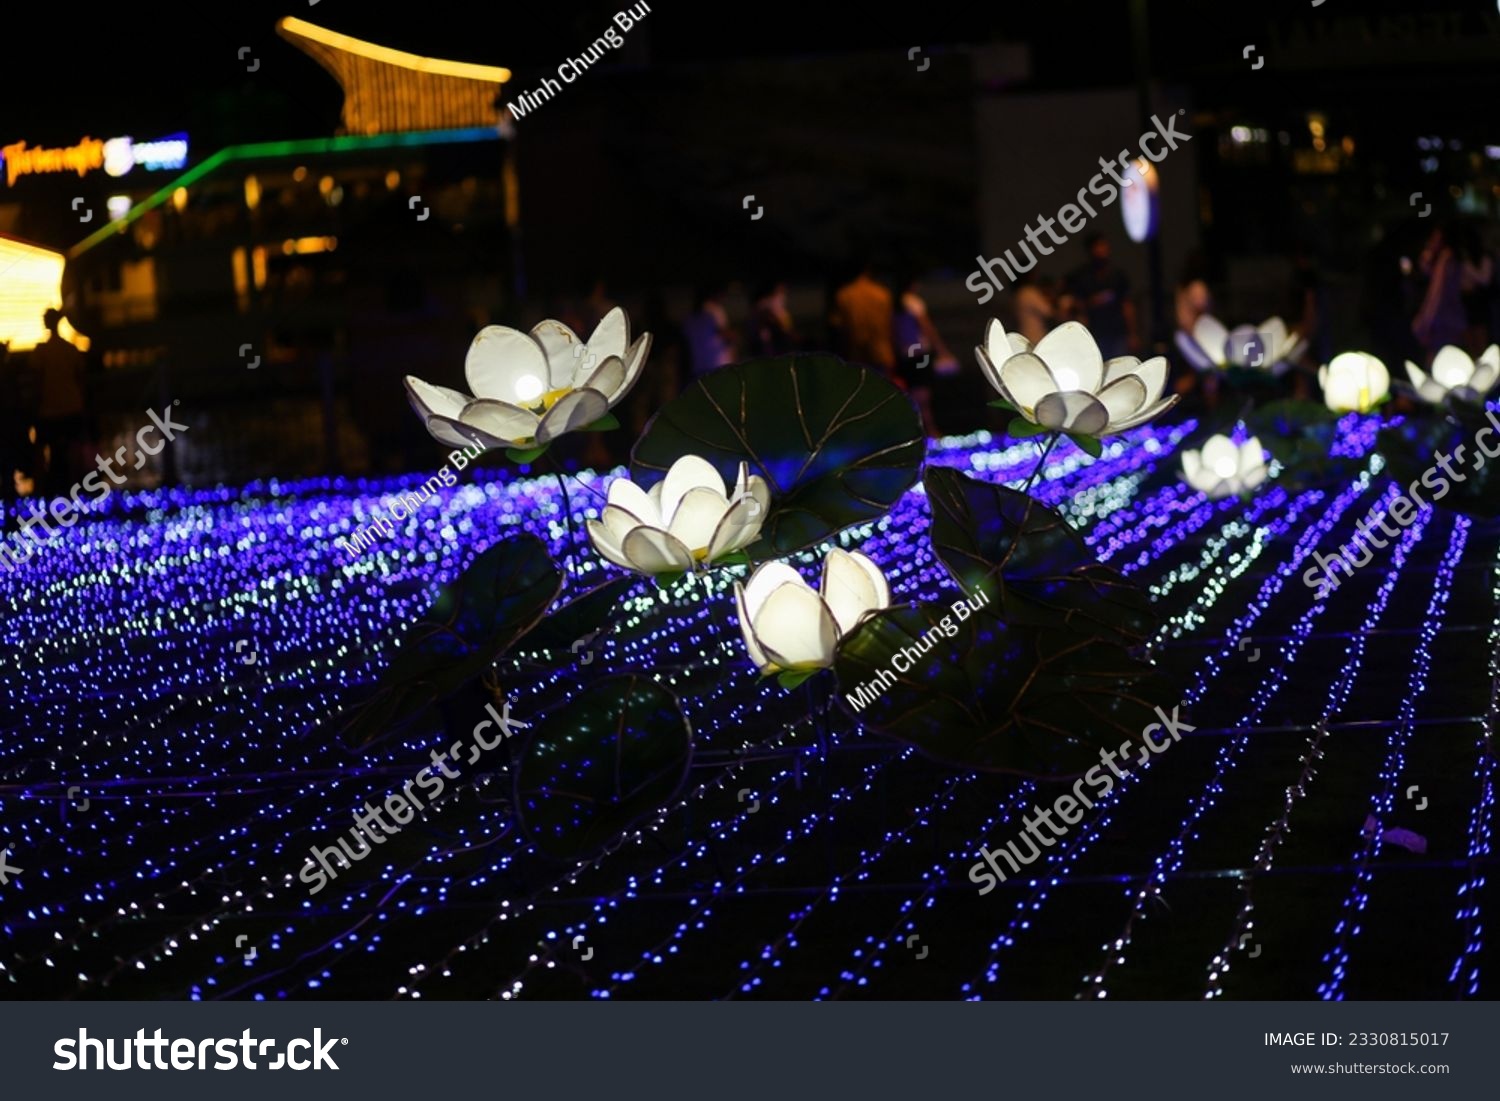 Blooming lotus flowers on the fresh water with led lights celebrating Vietnam-Japan diplomatic relations at Bach Dang Wharf Park, Ho Chi Minh City #2330815017